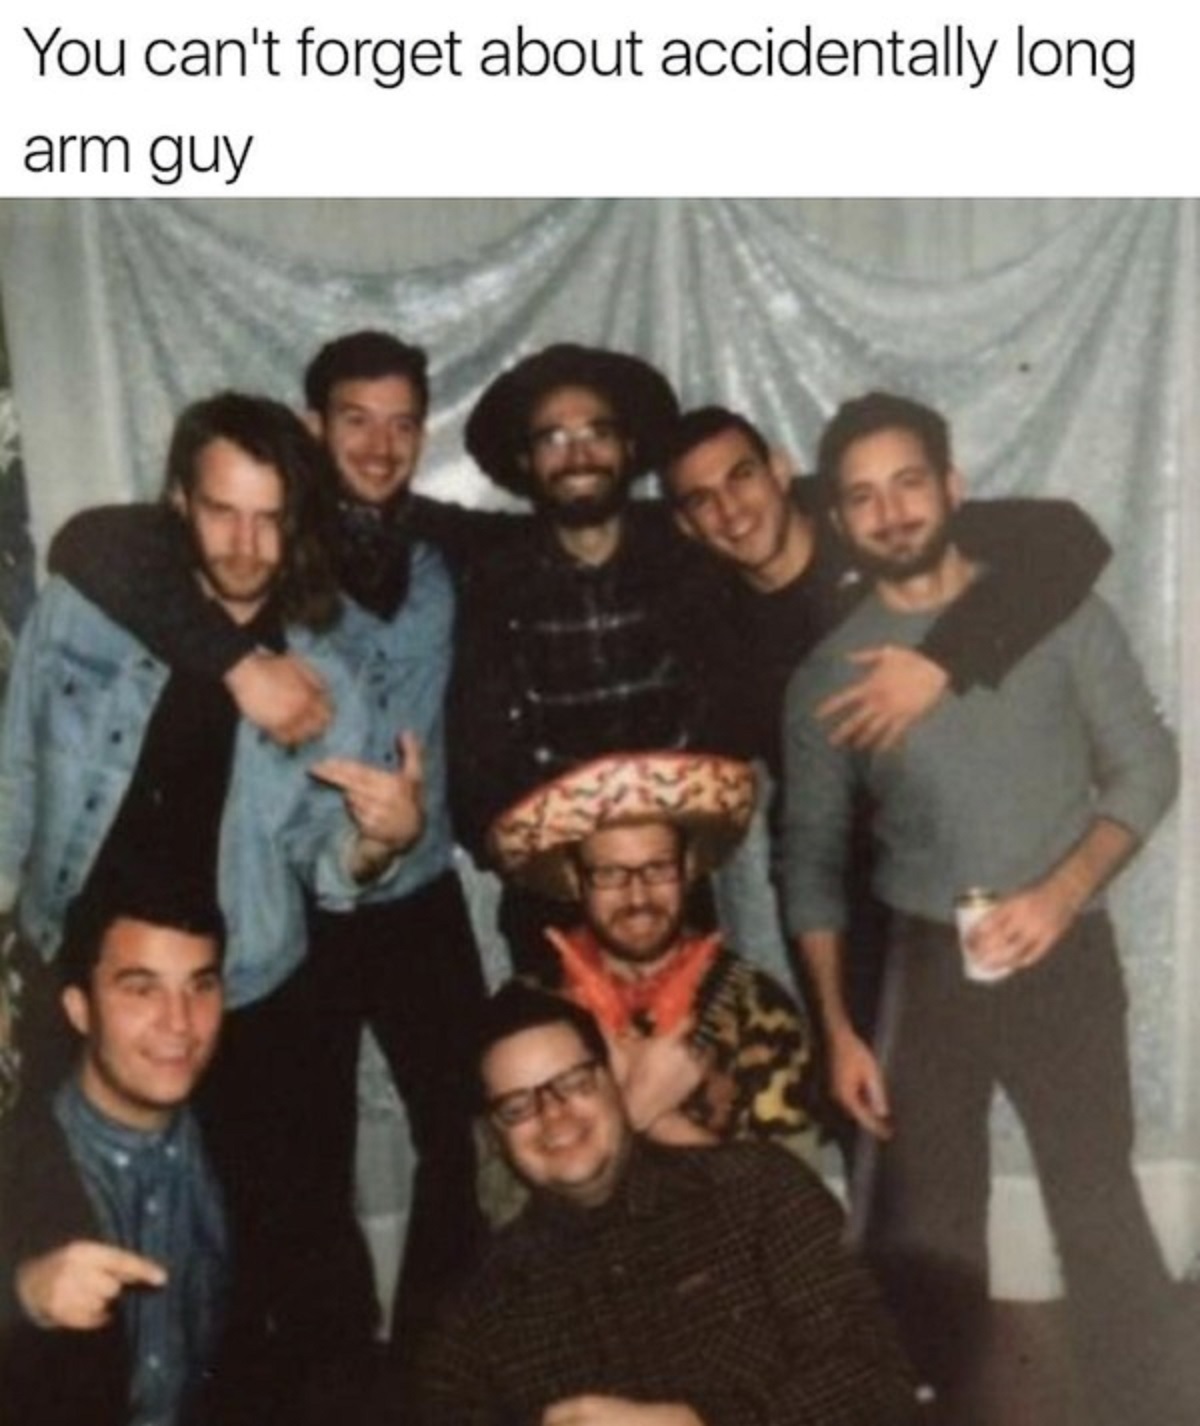 long are this guy's arms meme - You can't forget about accidentally long arm guy